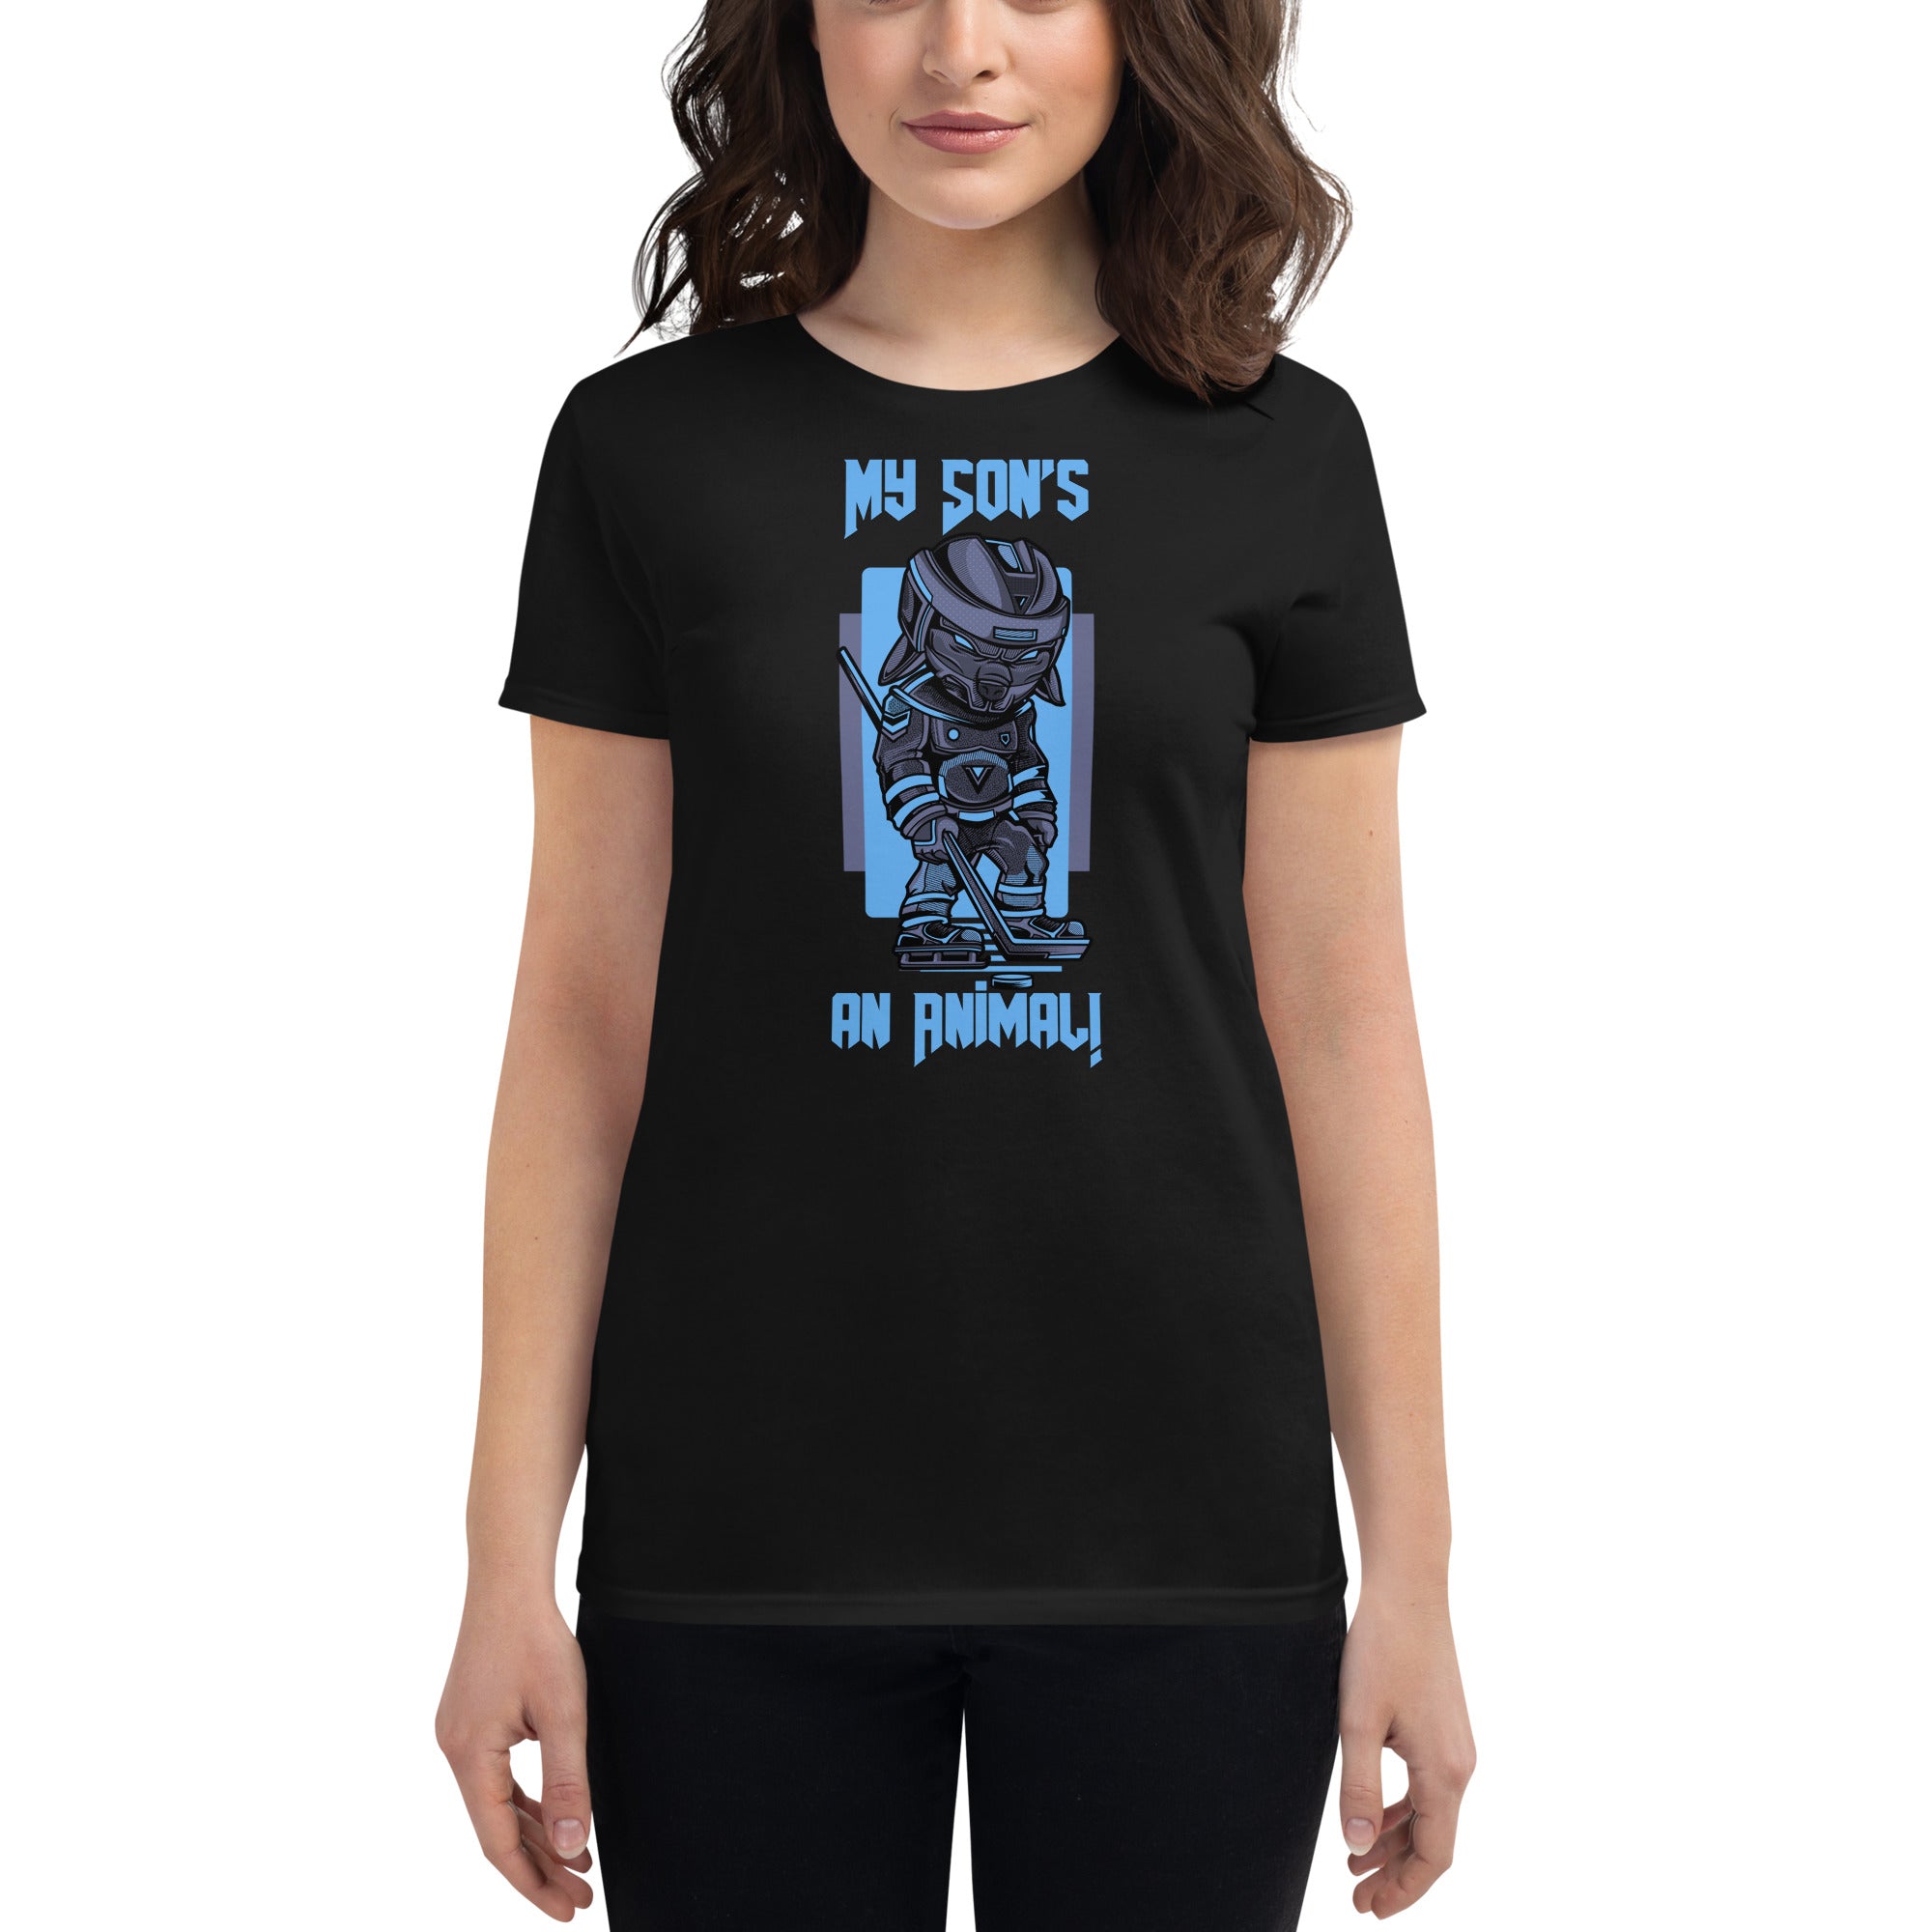 My Son's An Animal Women's Fitted T-Shirt